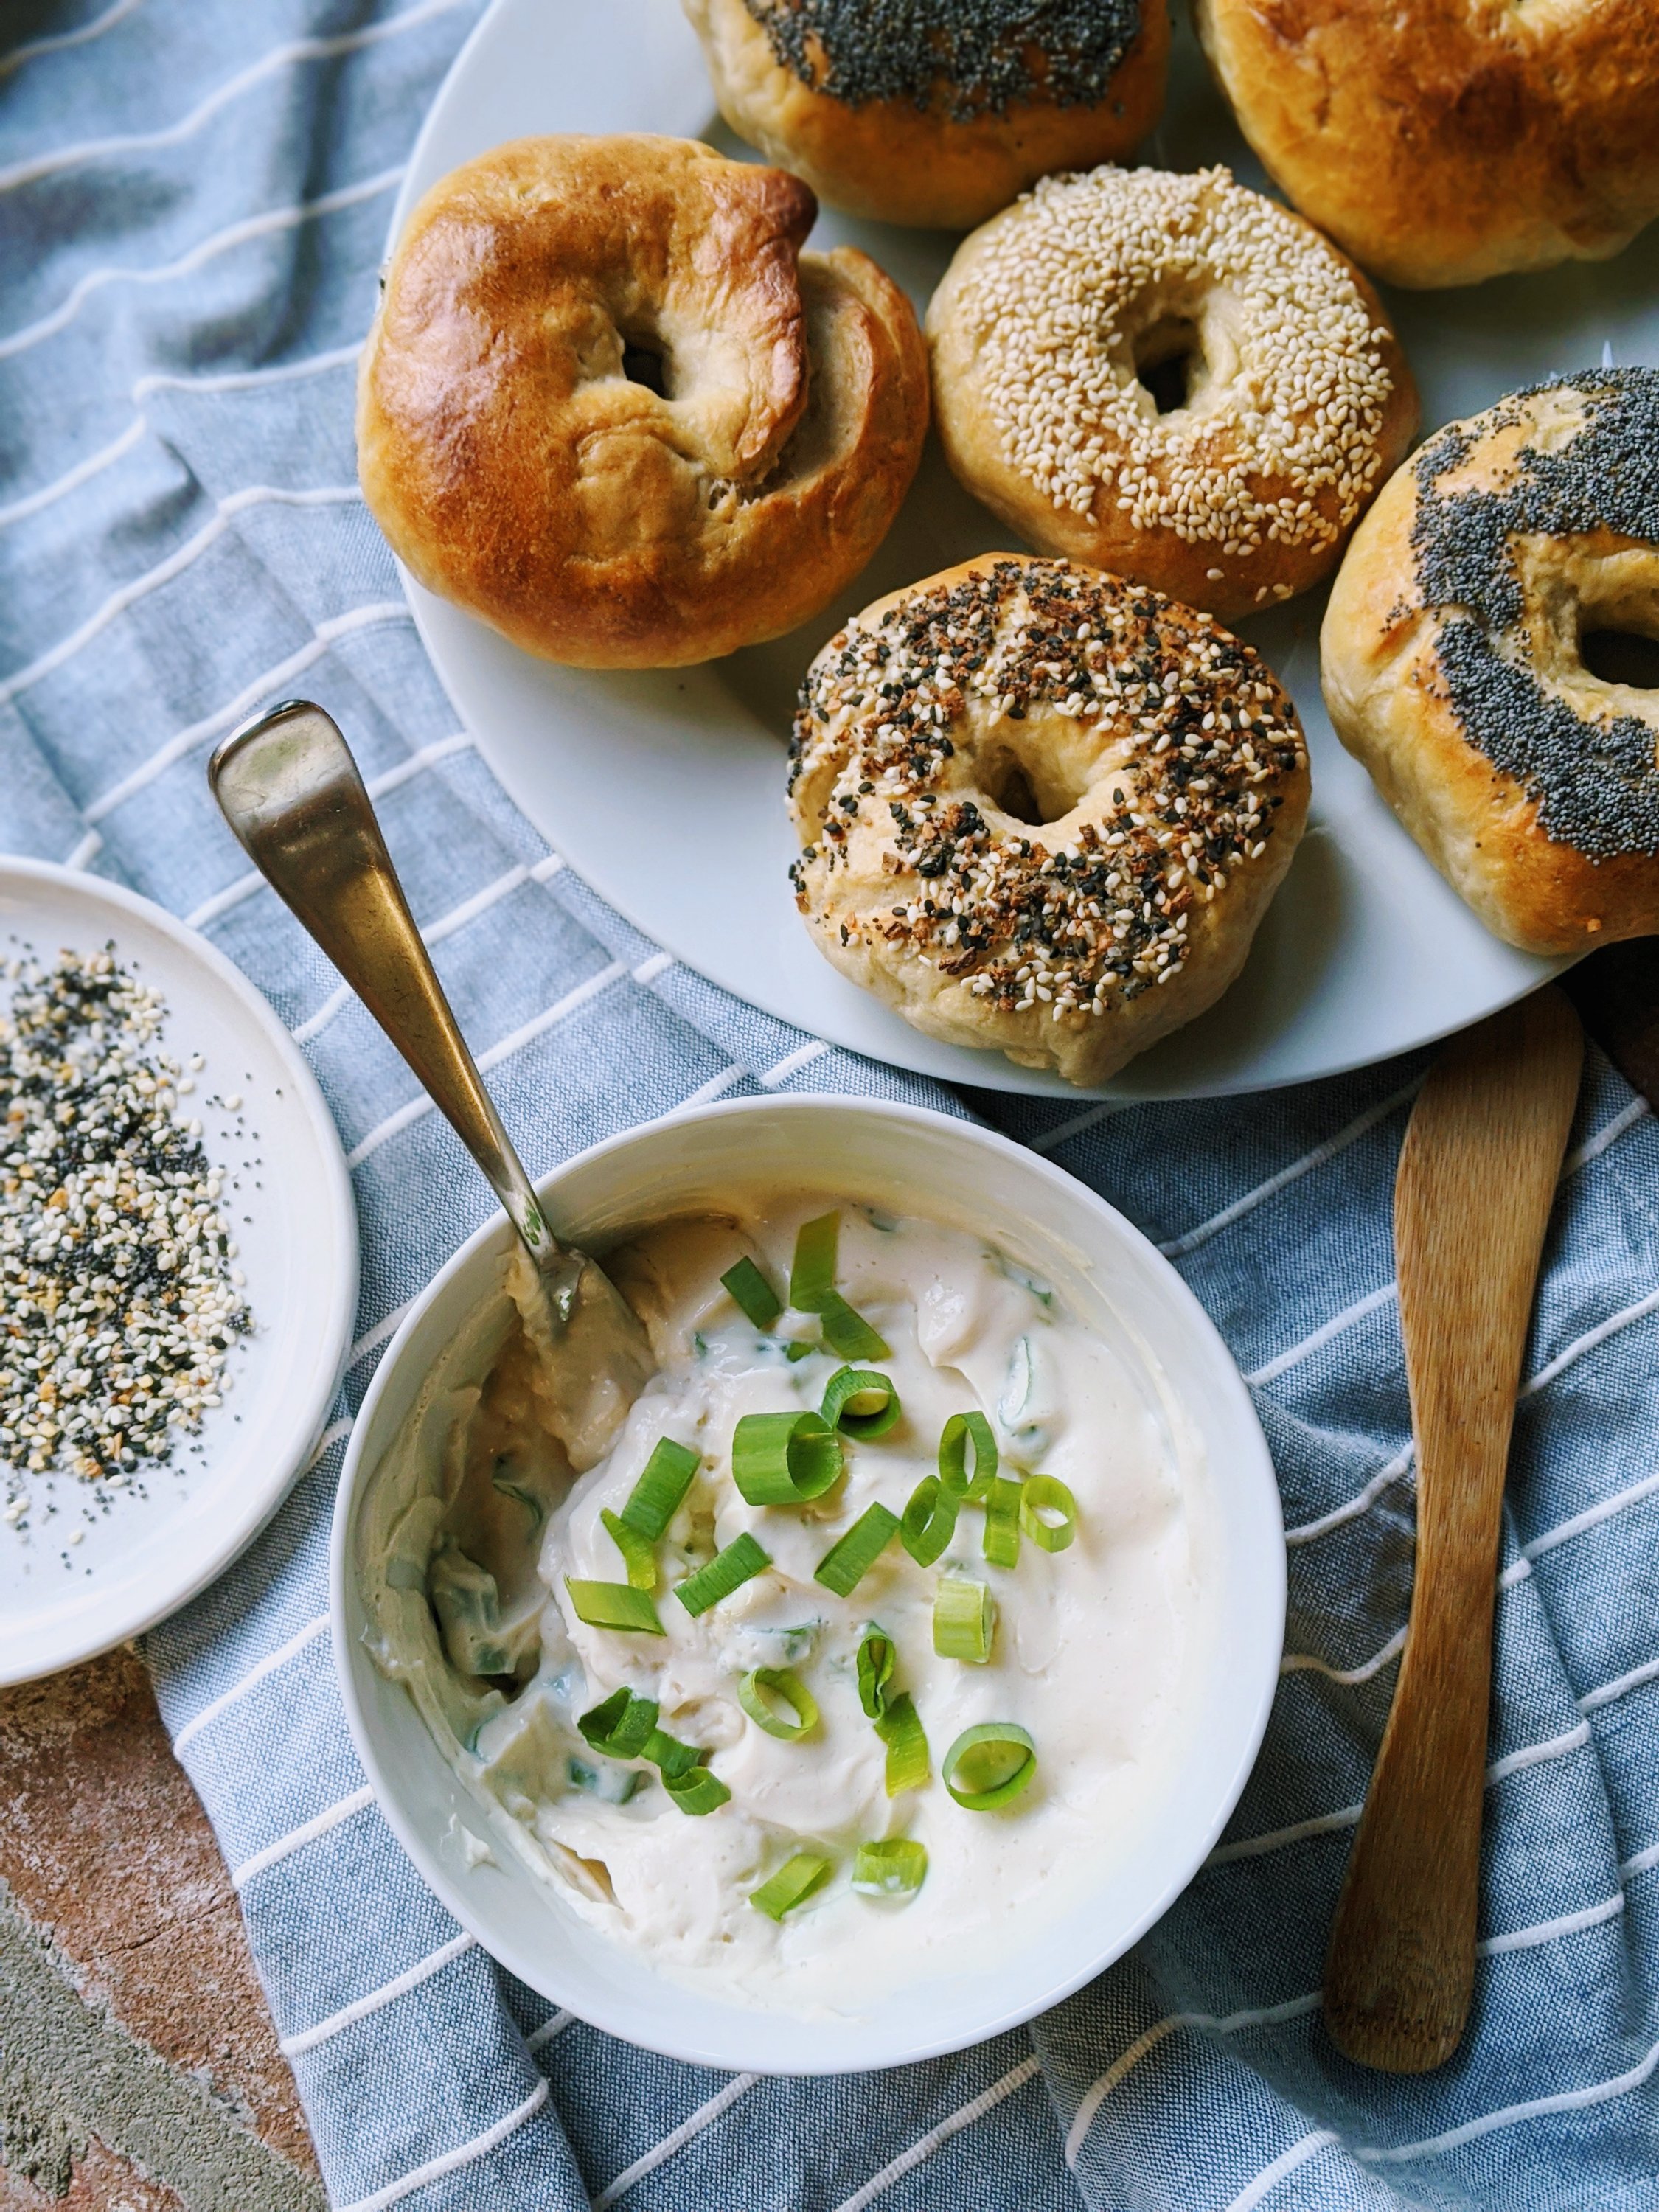 homemade vegan bagels with dairy free cream cheese recipe impressive brunch recipes with sourdough starter easy fun to make with kids